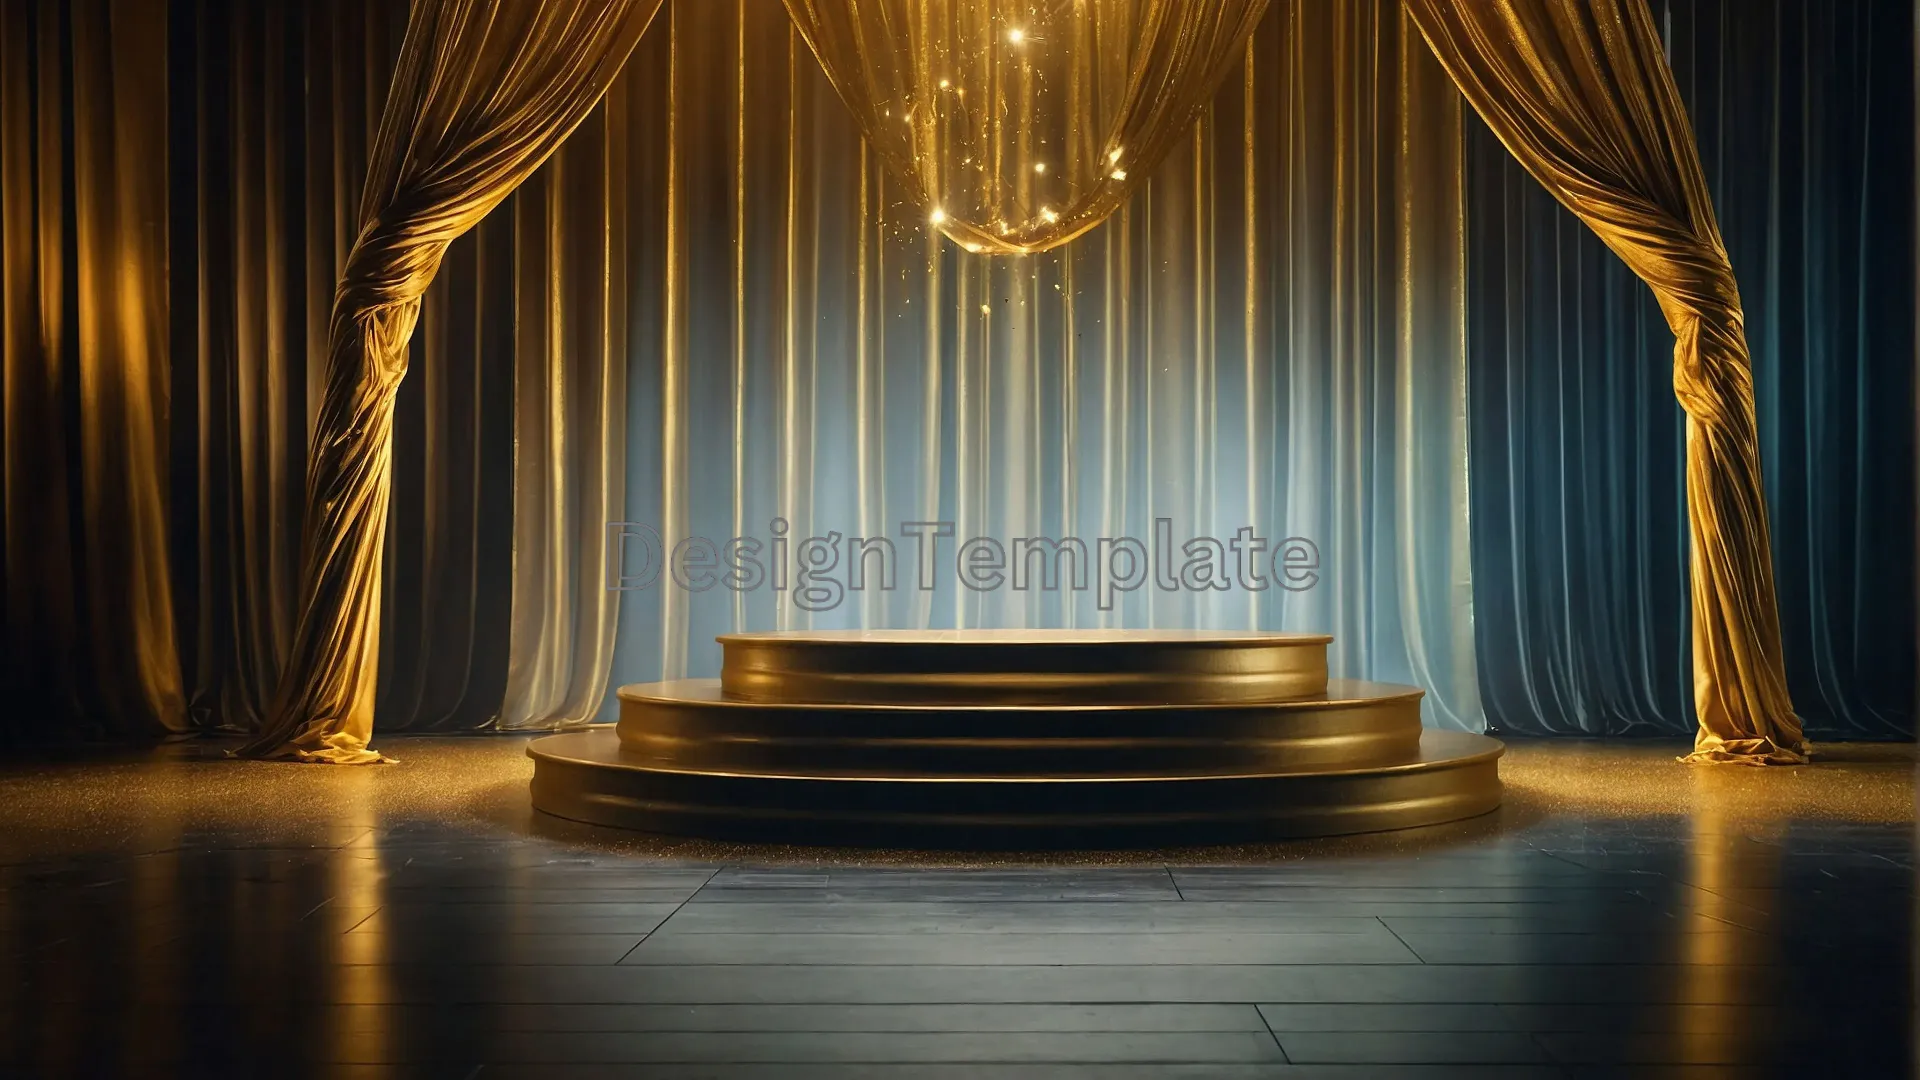 Golden Fabric Glamour Award Show Stage in Stunning Photo Backdrop image